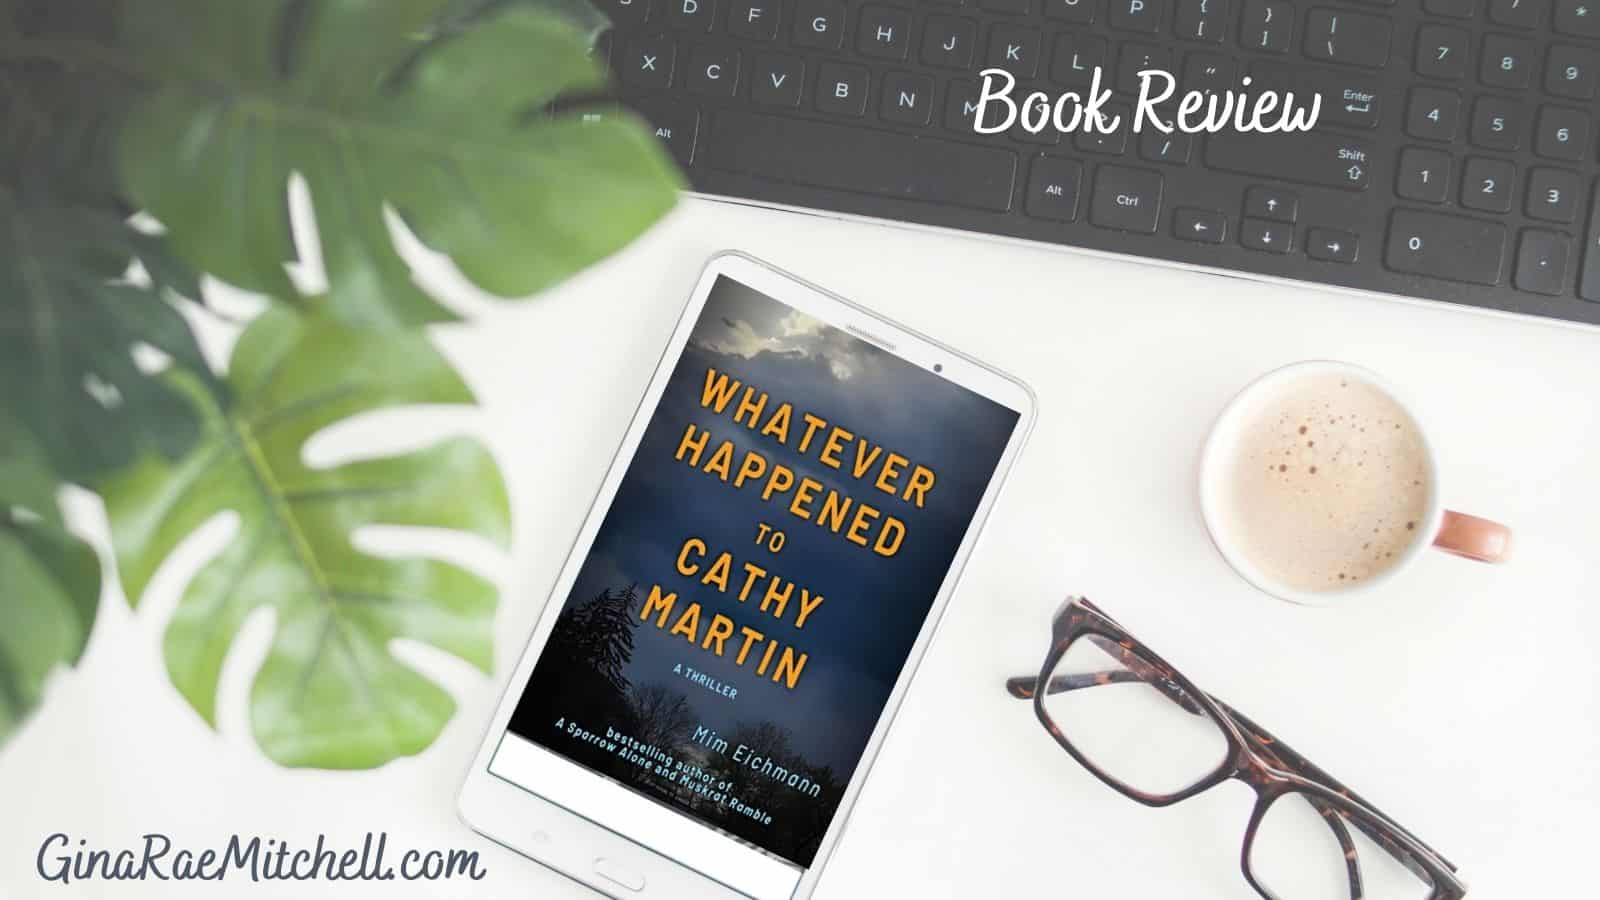 What Ever Happened to Cathy Martin by Mim Eichmann | Review | 5-Star #MurderMystery #HistoricalFiction #Thriller